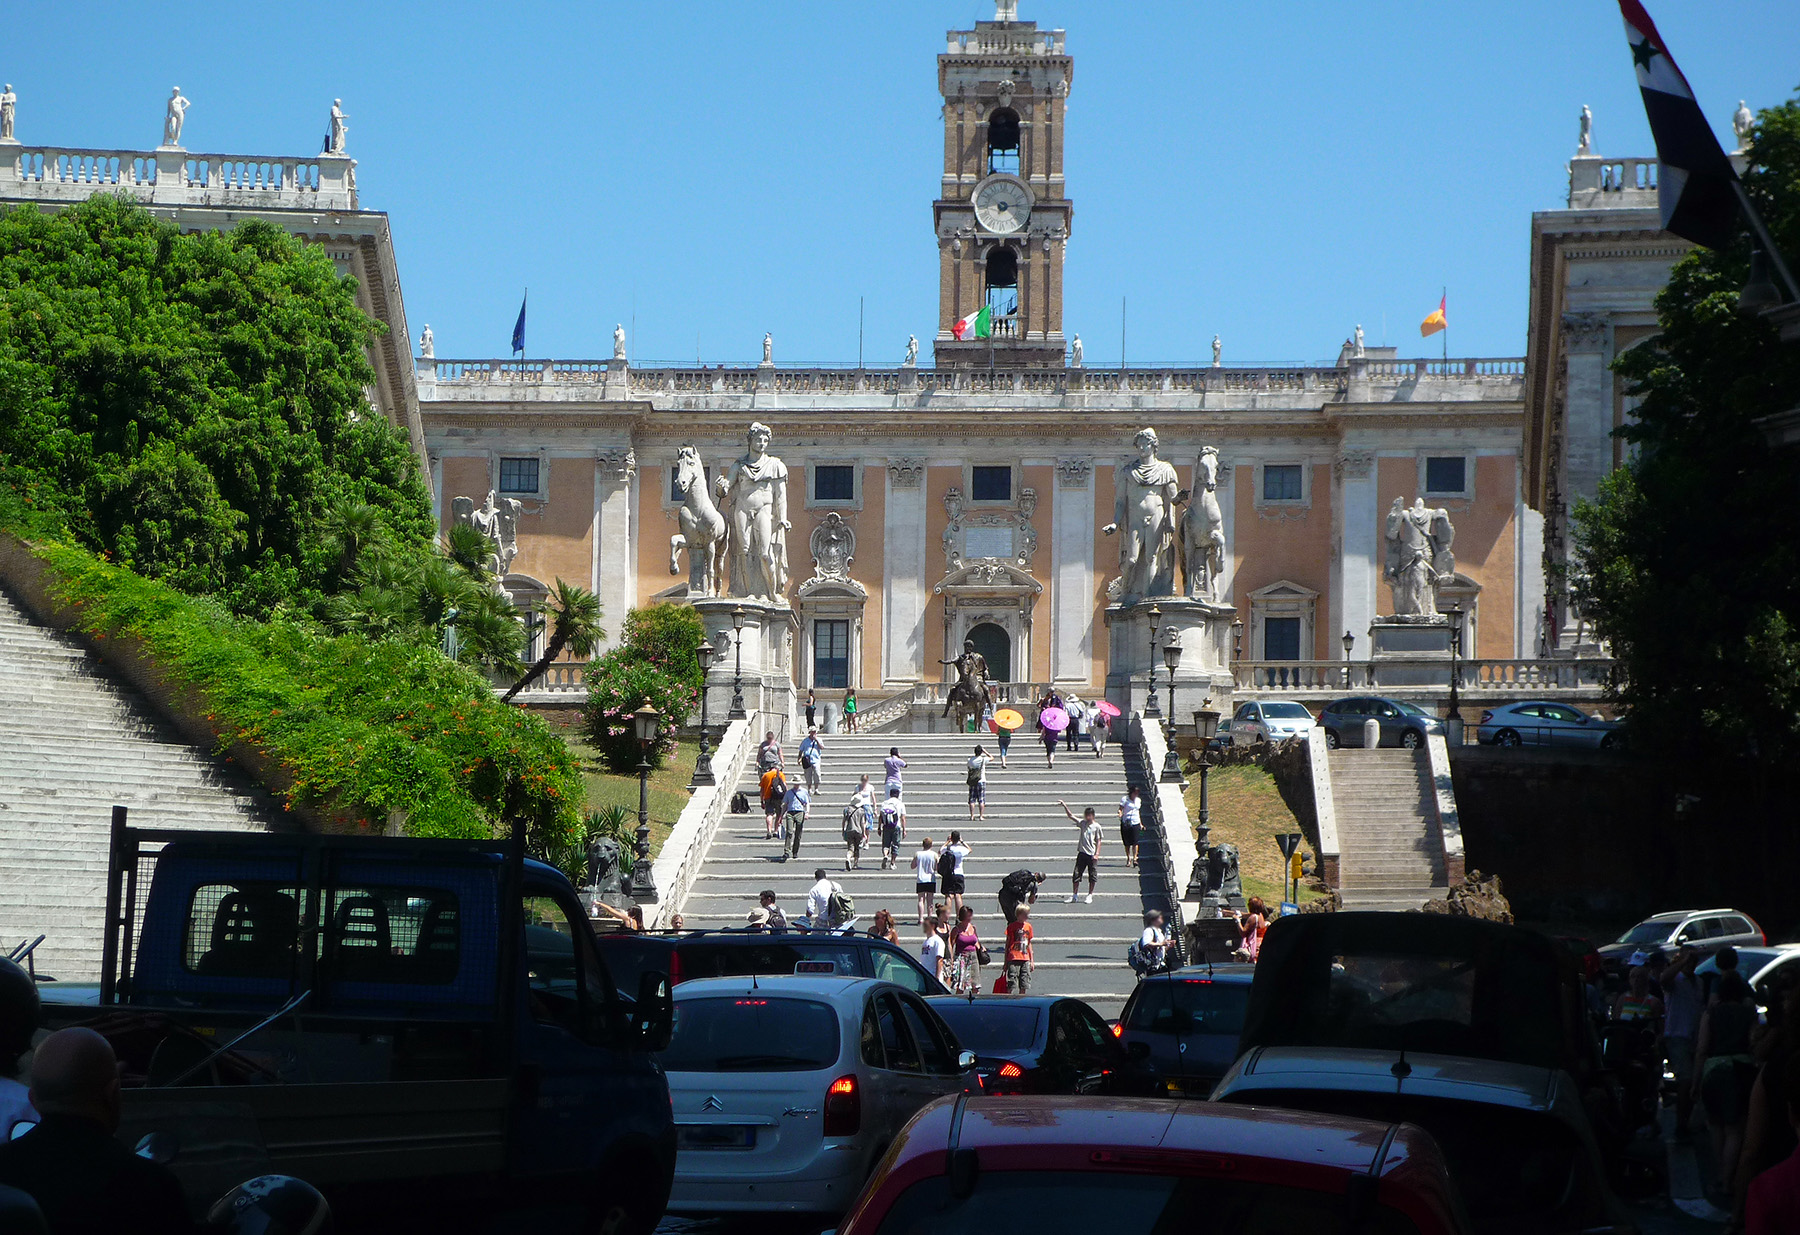 Looking up to the Capitoline Hill from the street below